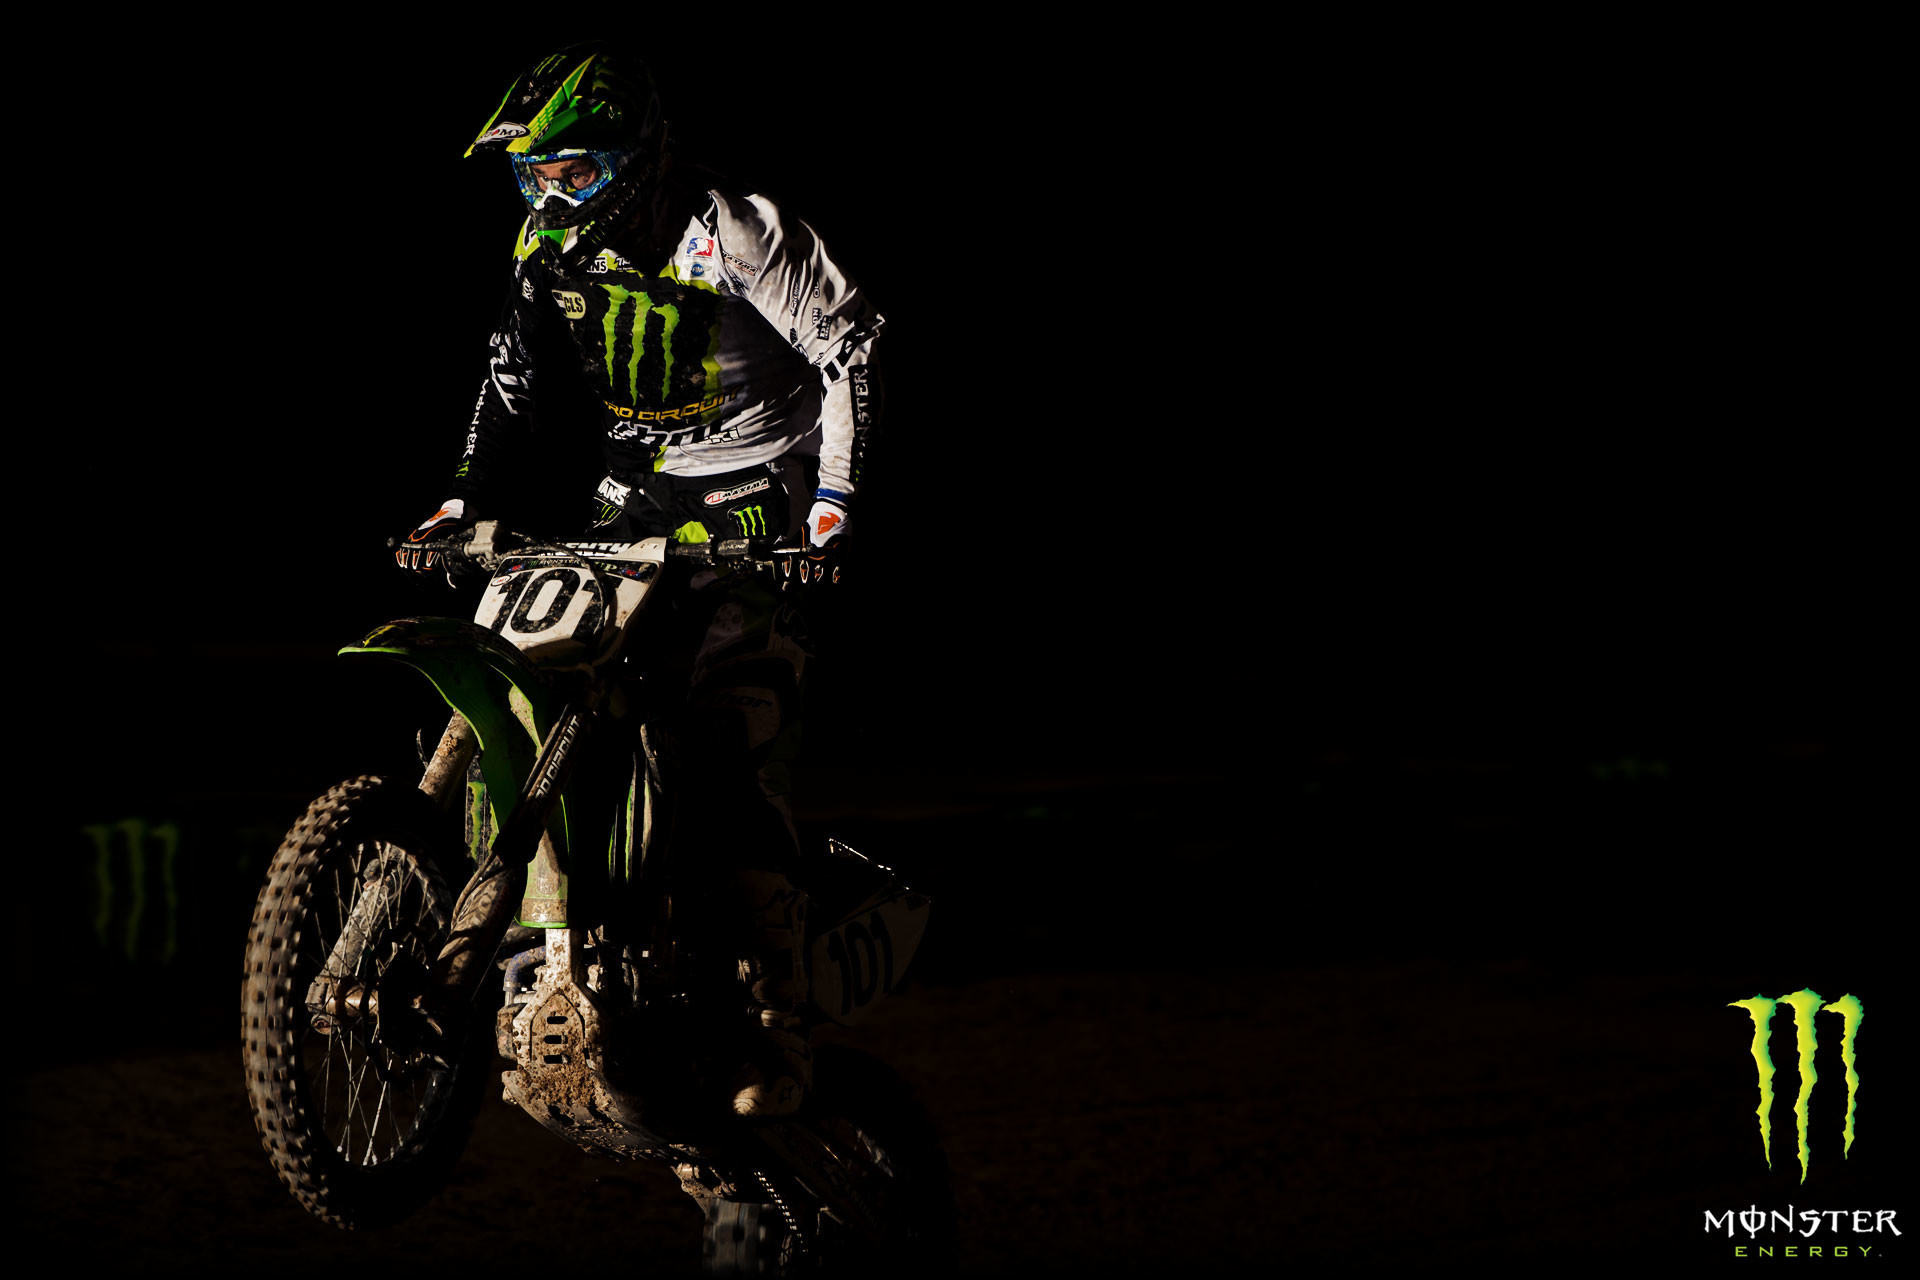 1920x1280 ... Images of Wallpapers Monster Energy Moto - #SC ...